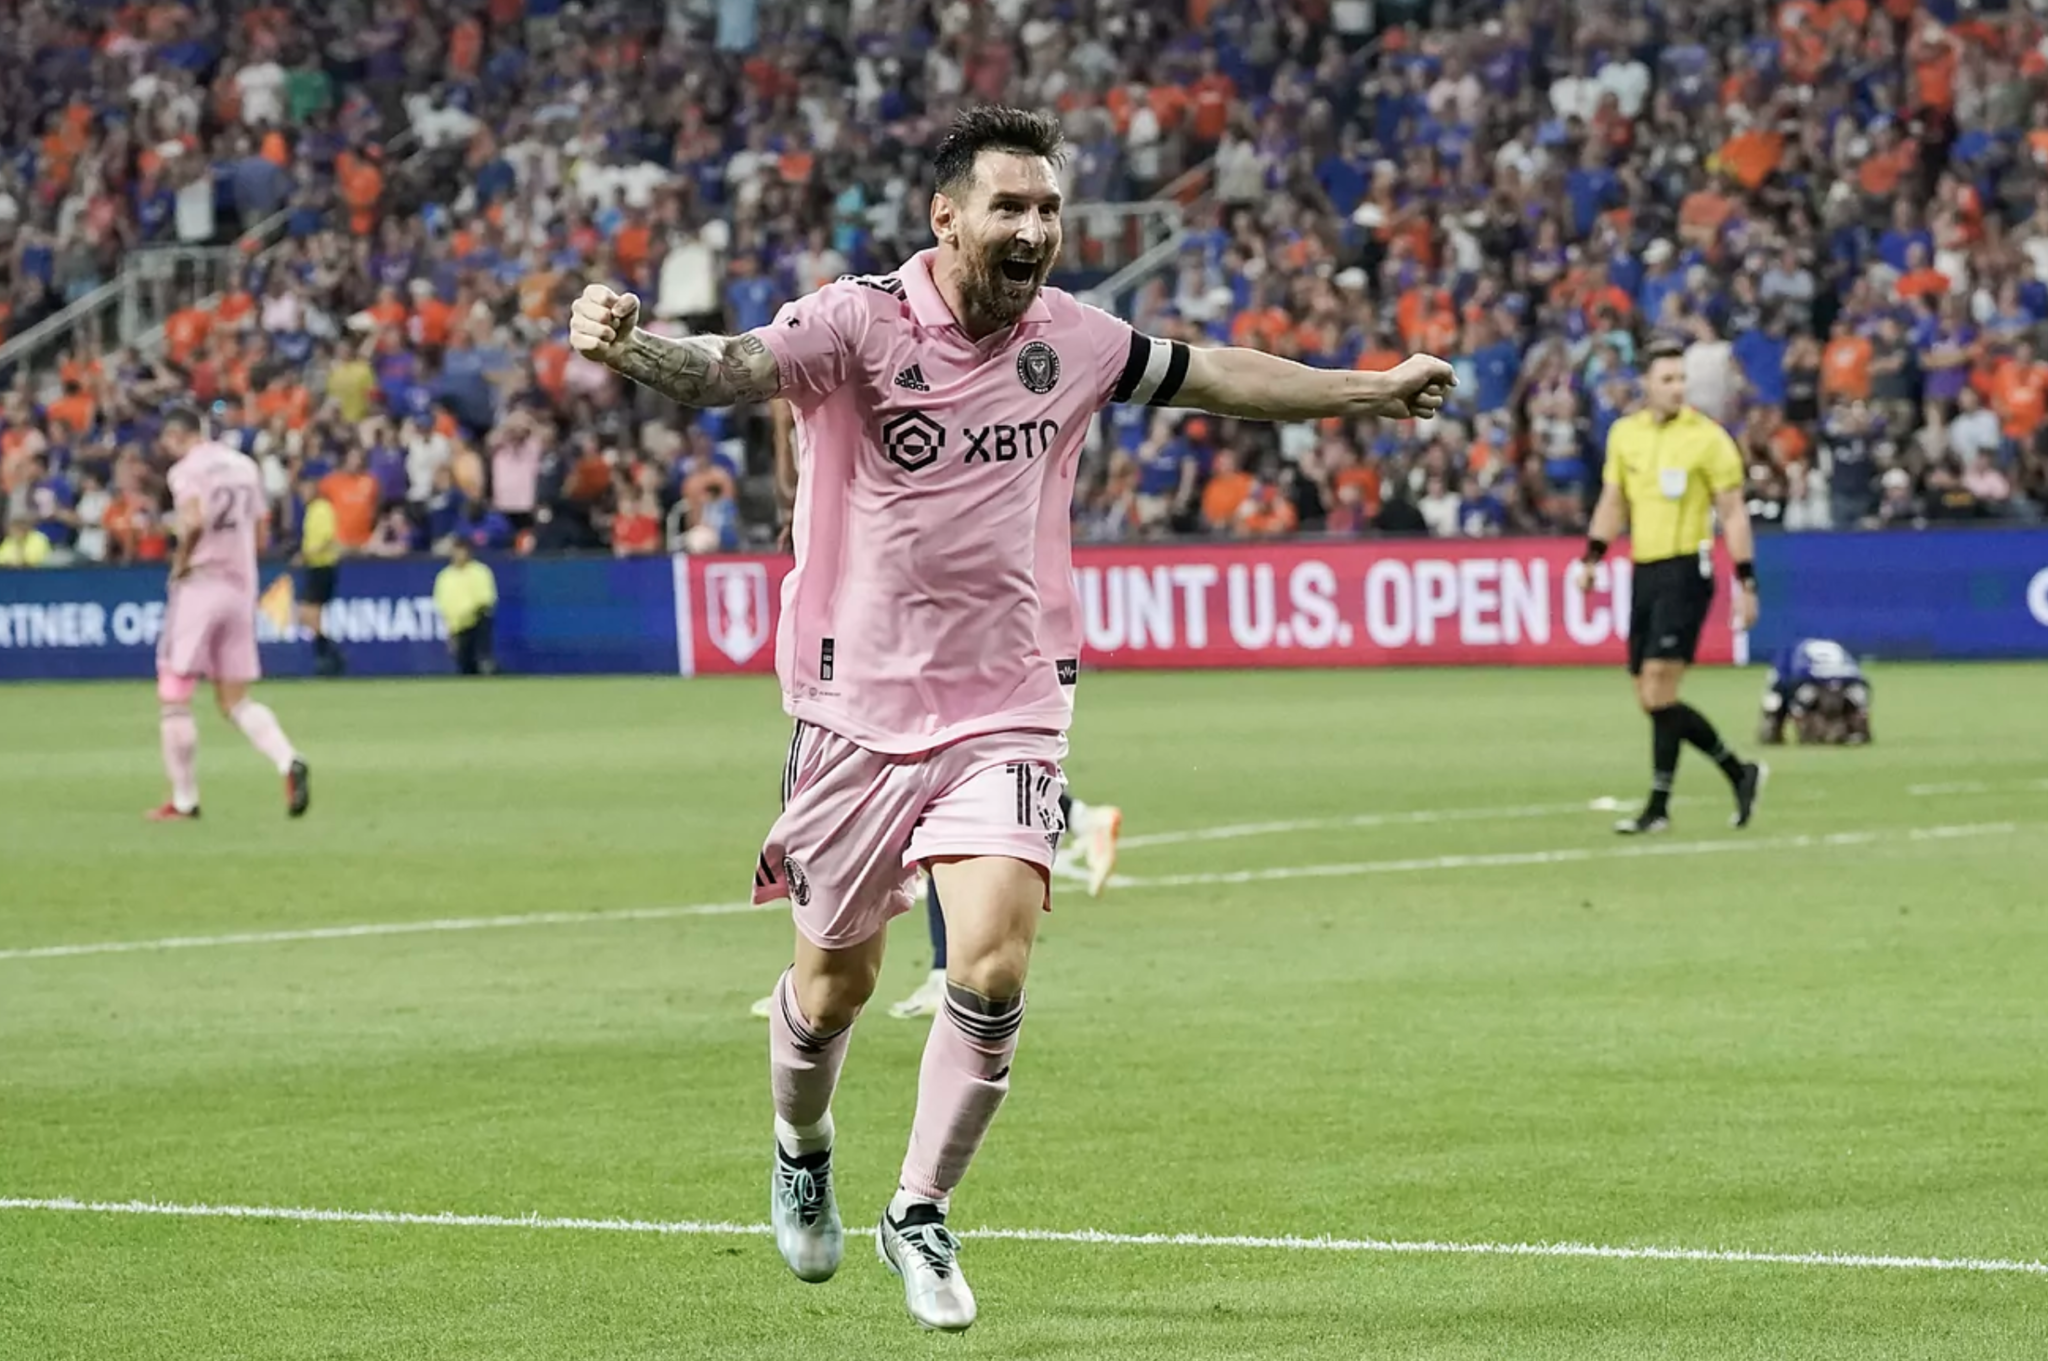 Houston Dynamo coach doesn't know what to do with Messi in US Open Cup final: Let me ask the 5,000 coaches that have tried before